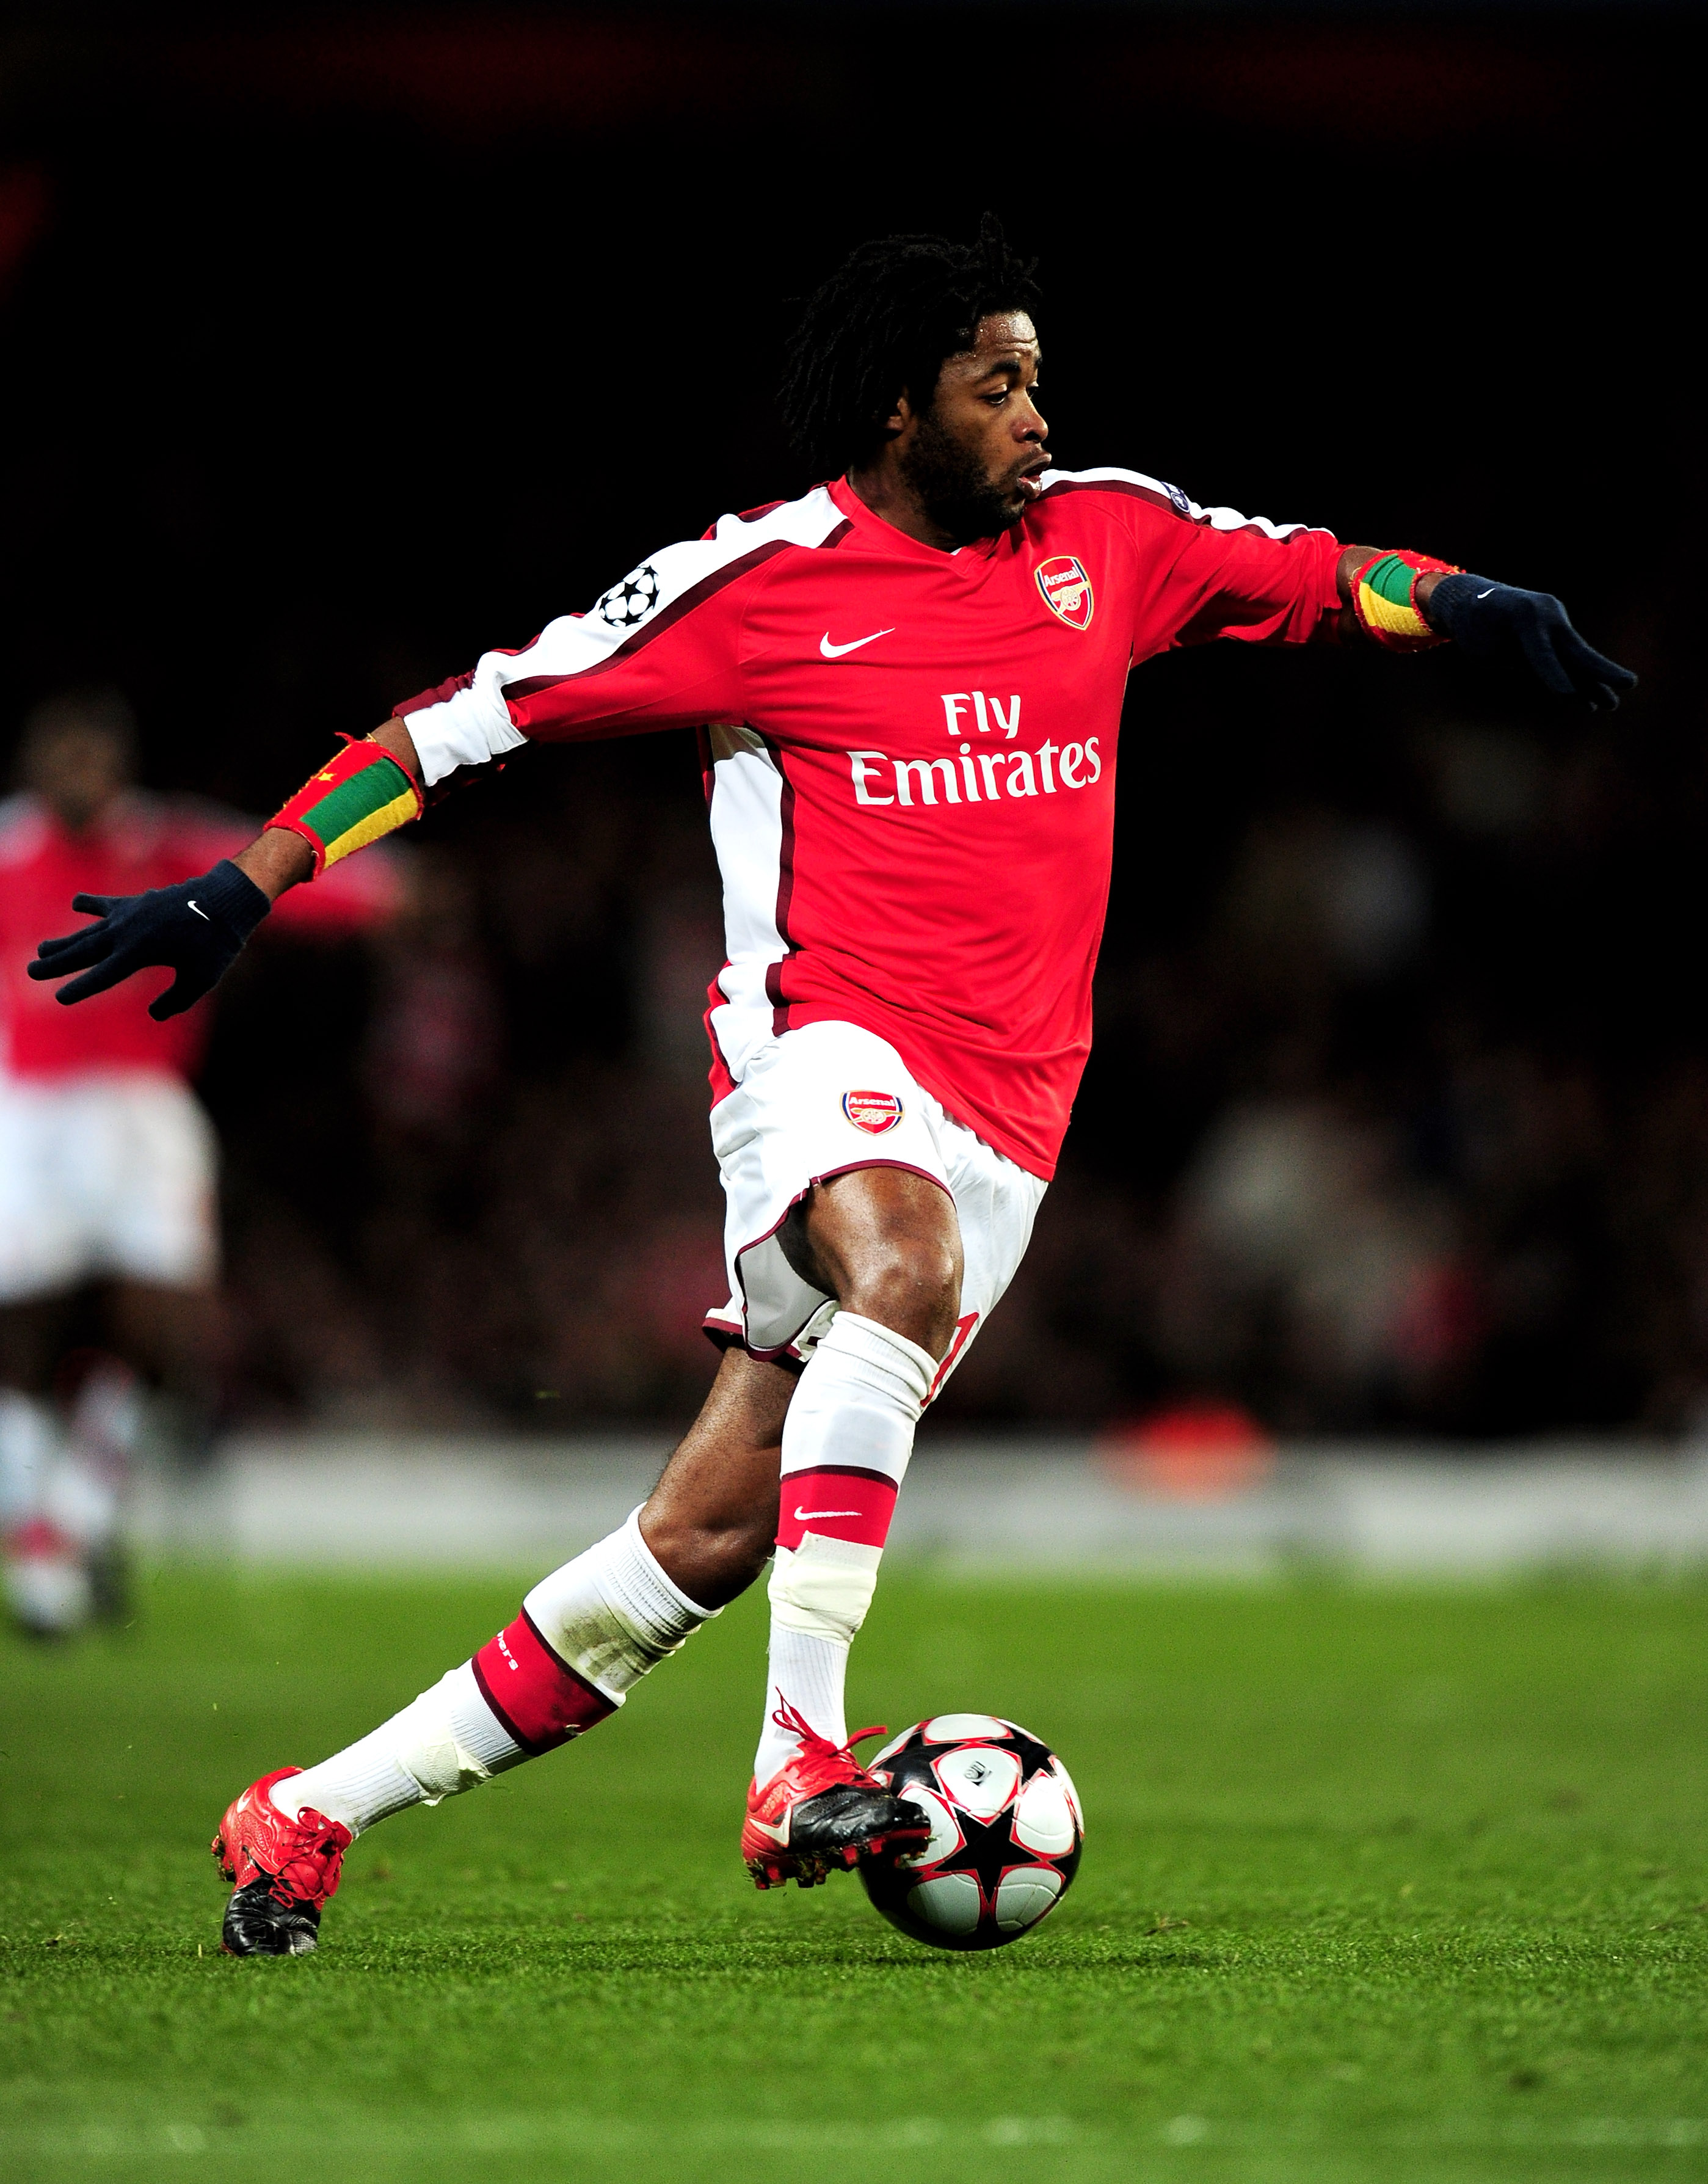 LONDON, ENGLAND - MARCH 09:  Alex Song of Arsenal runs with the ball during the UEFA Champions League round of 16 match between Arsenal and FC Porto at the Emirates Stadium on March 9, 2010 in London, England.  (Photo by Mike Hewitt/Getty Images)